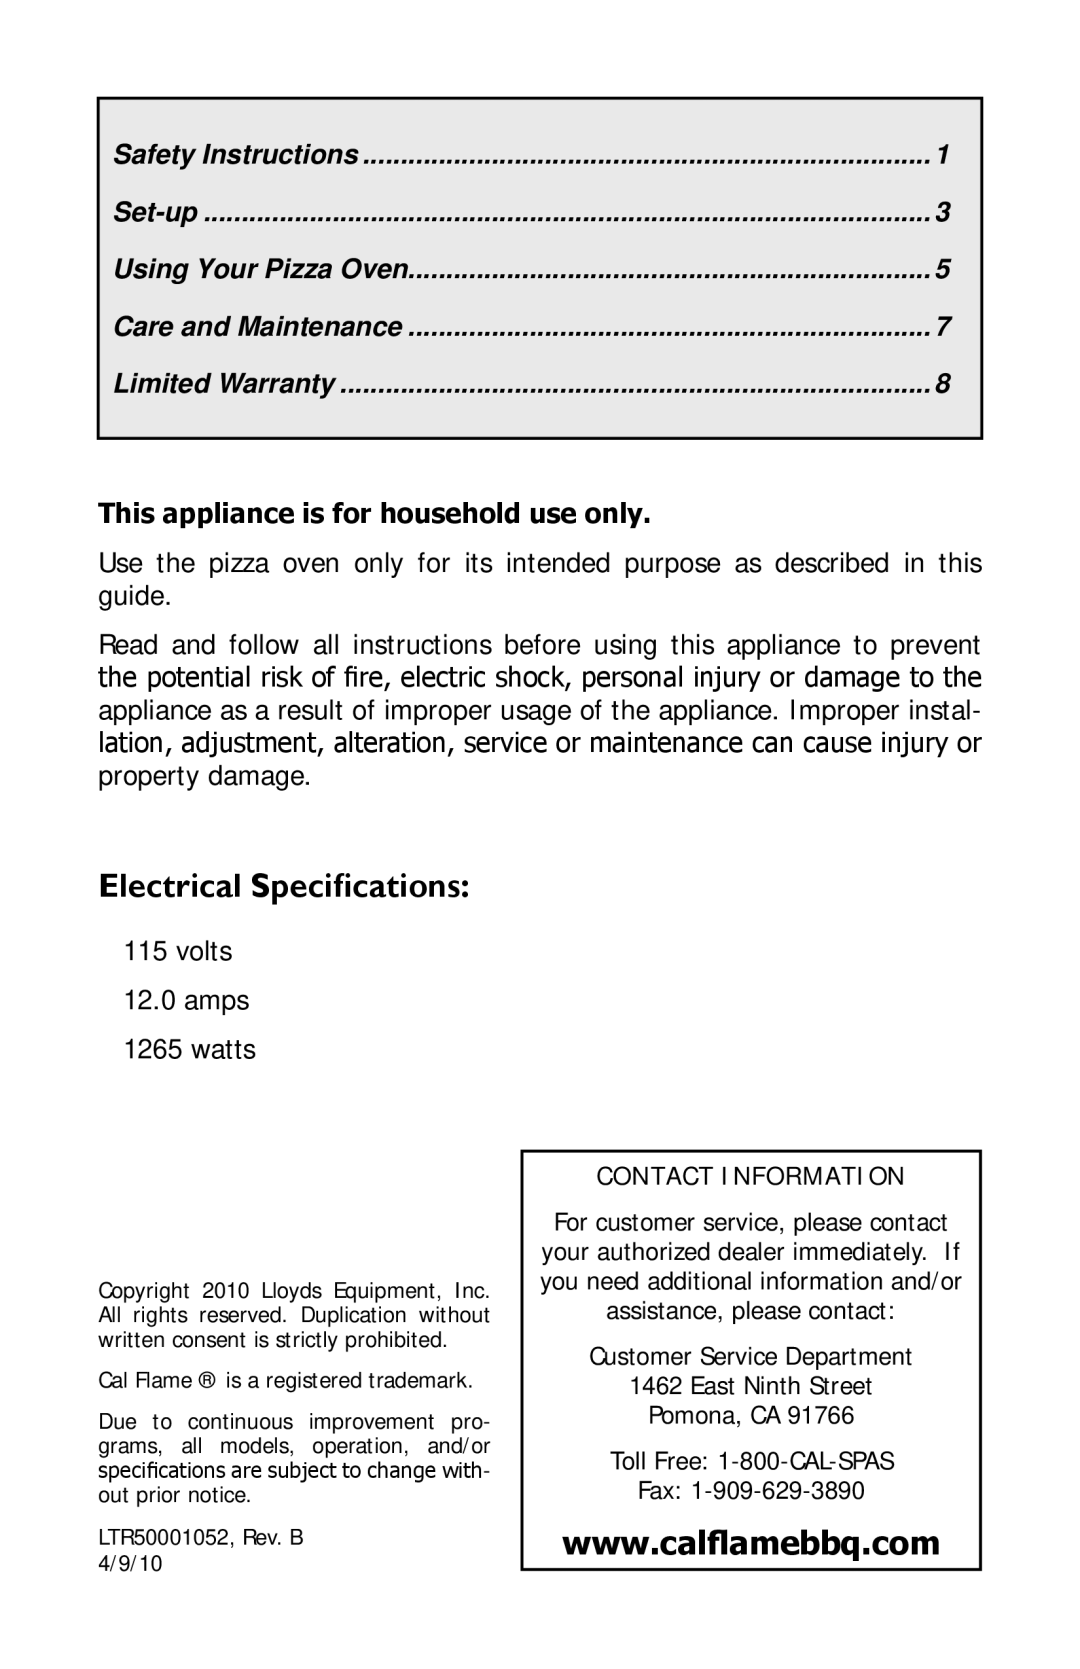 Cal Flame BBQ10967E manual Electrical Specifications 